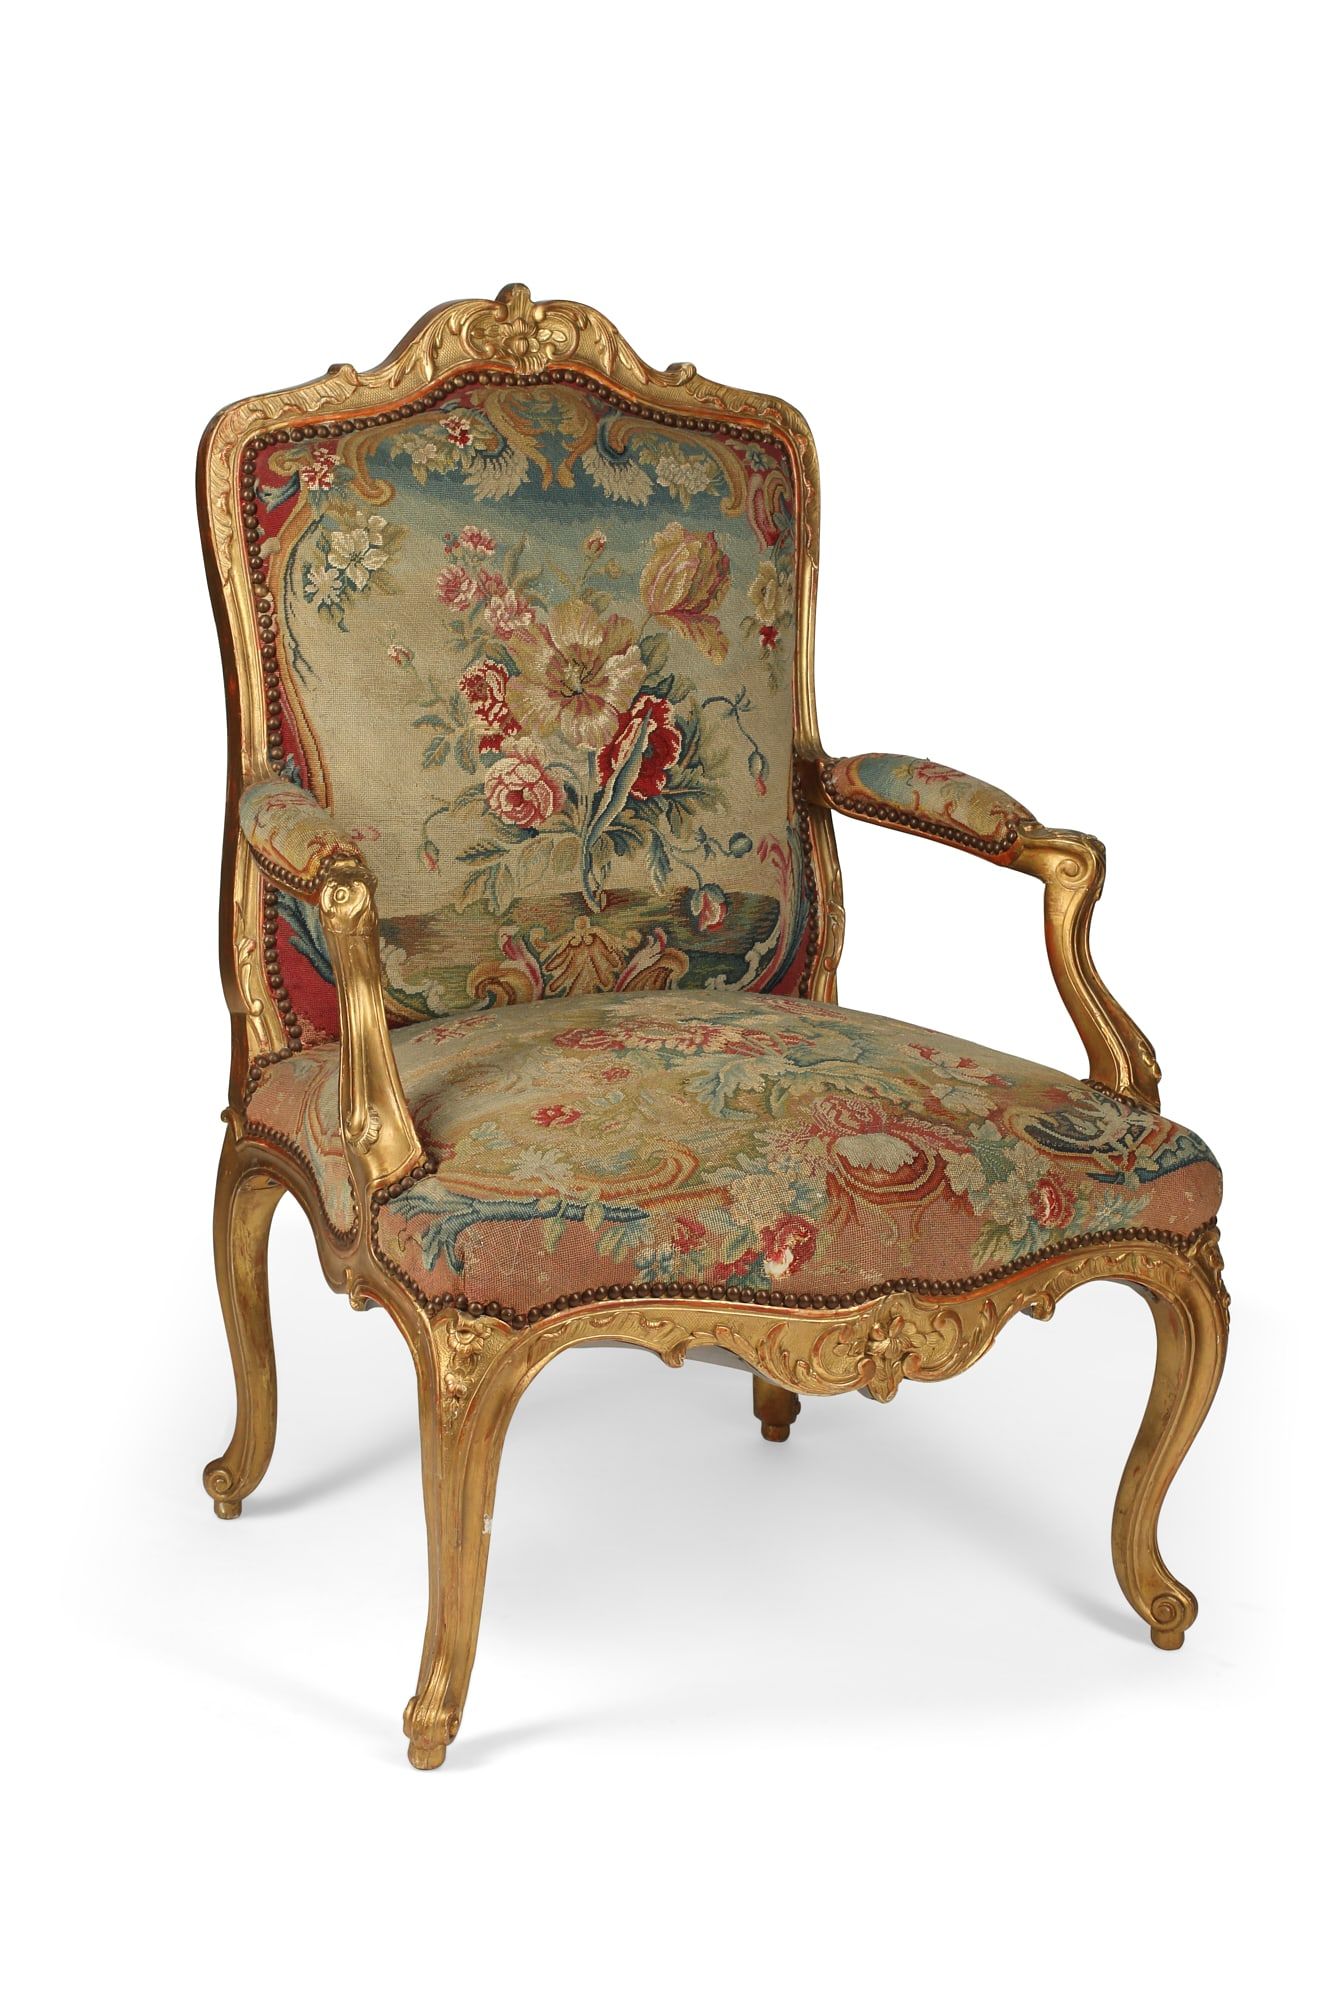 A LOUIS XV STYLE NEEDLEPOINT UPHOLSTERED 2fb3d9e